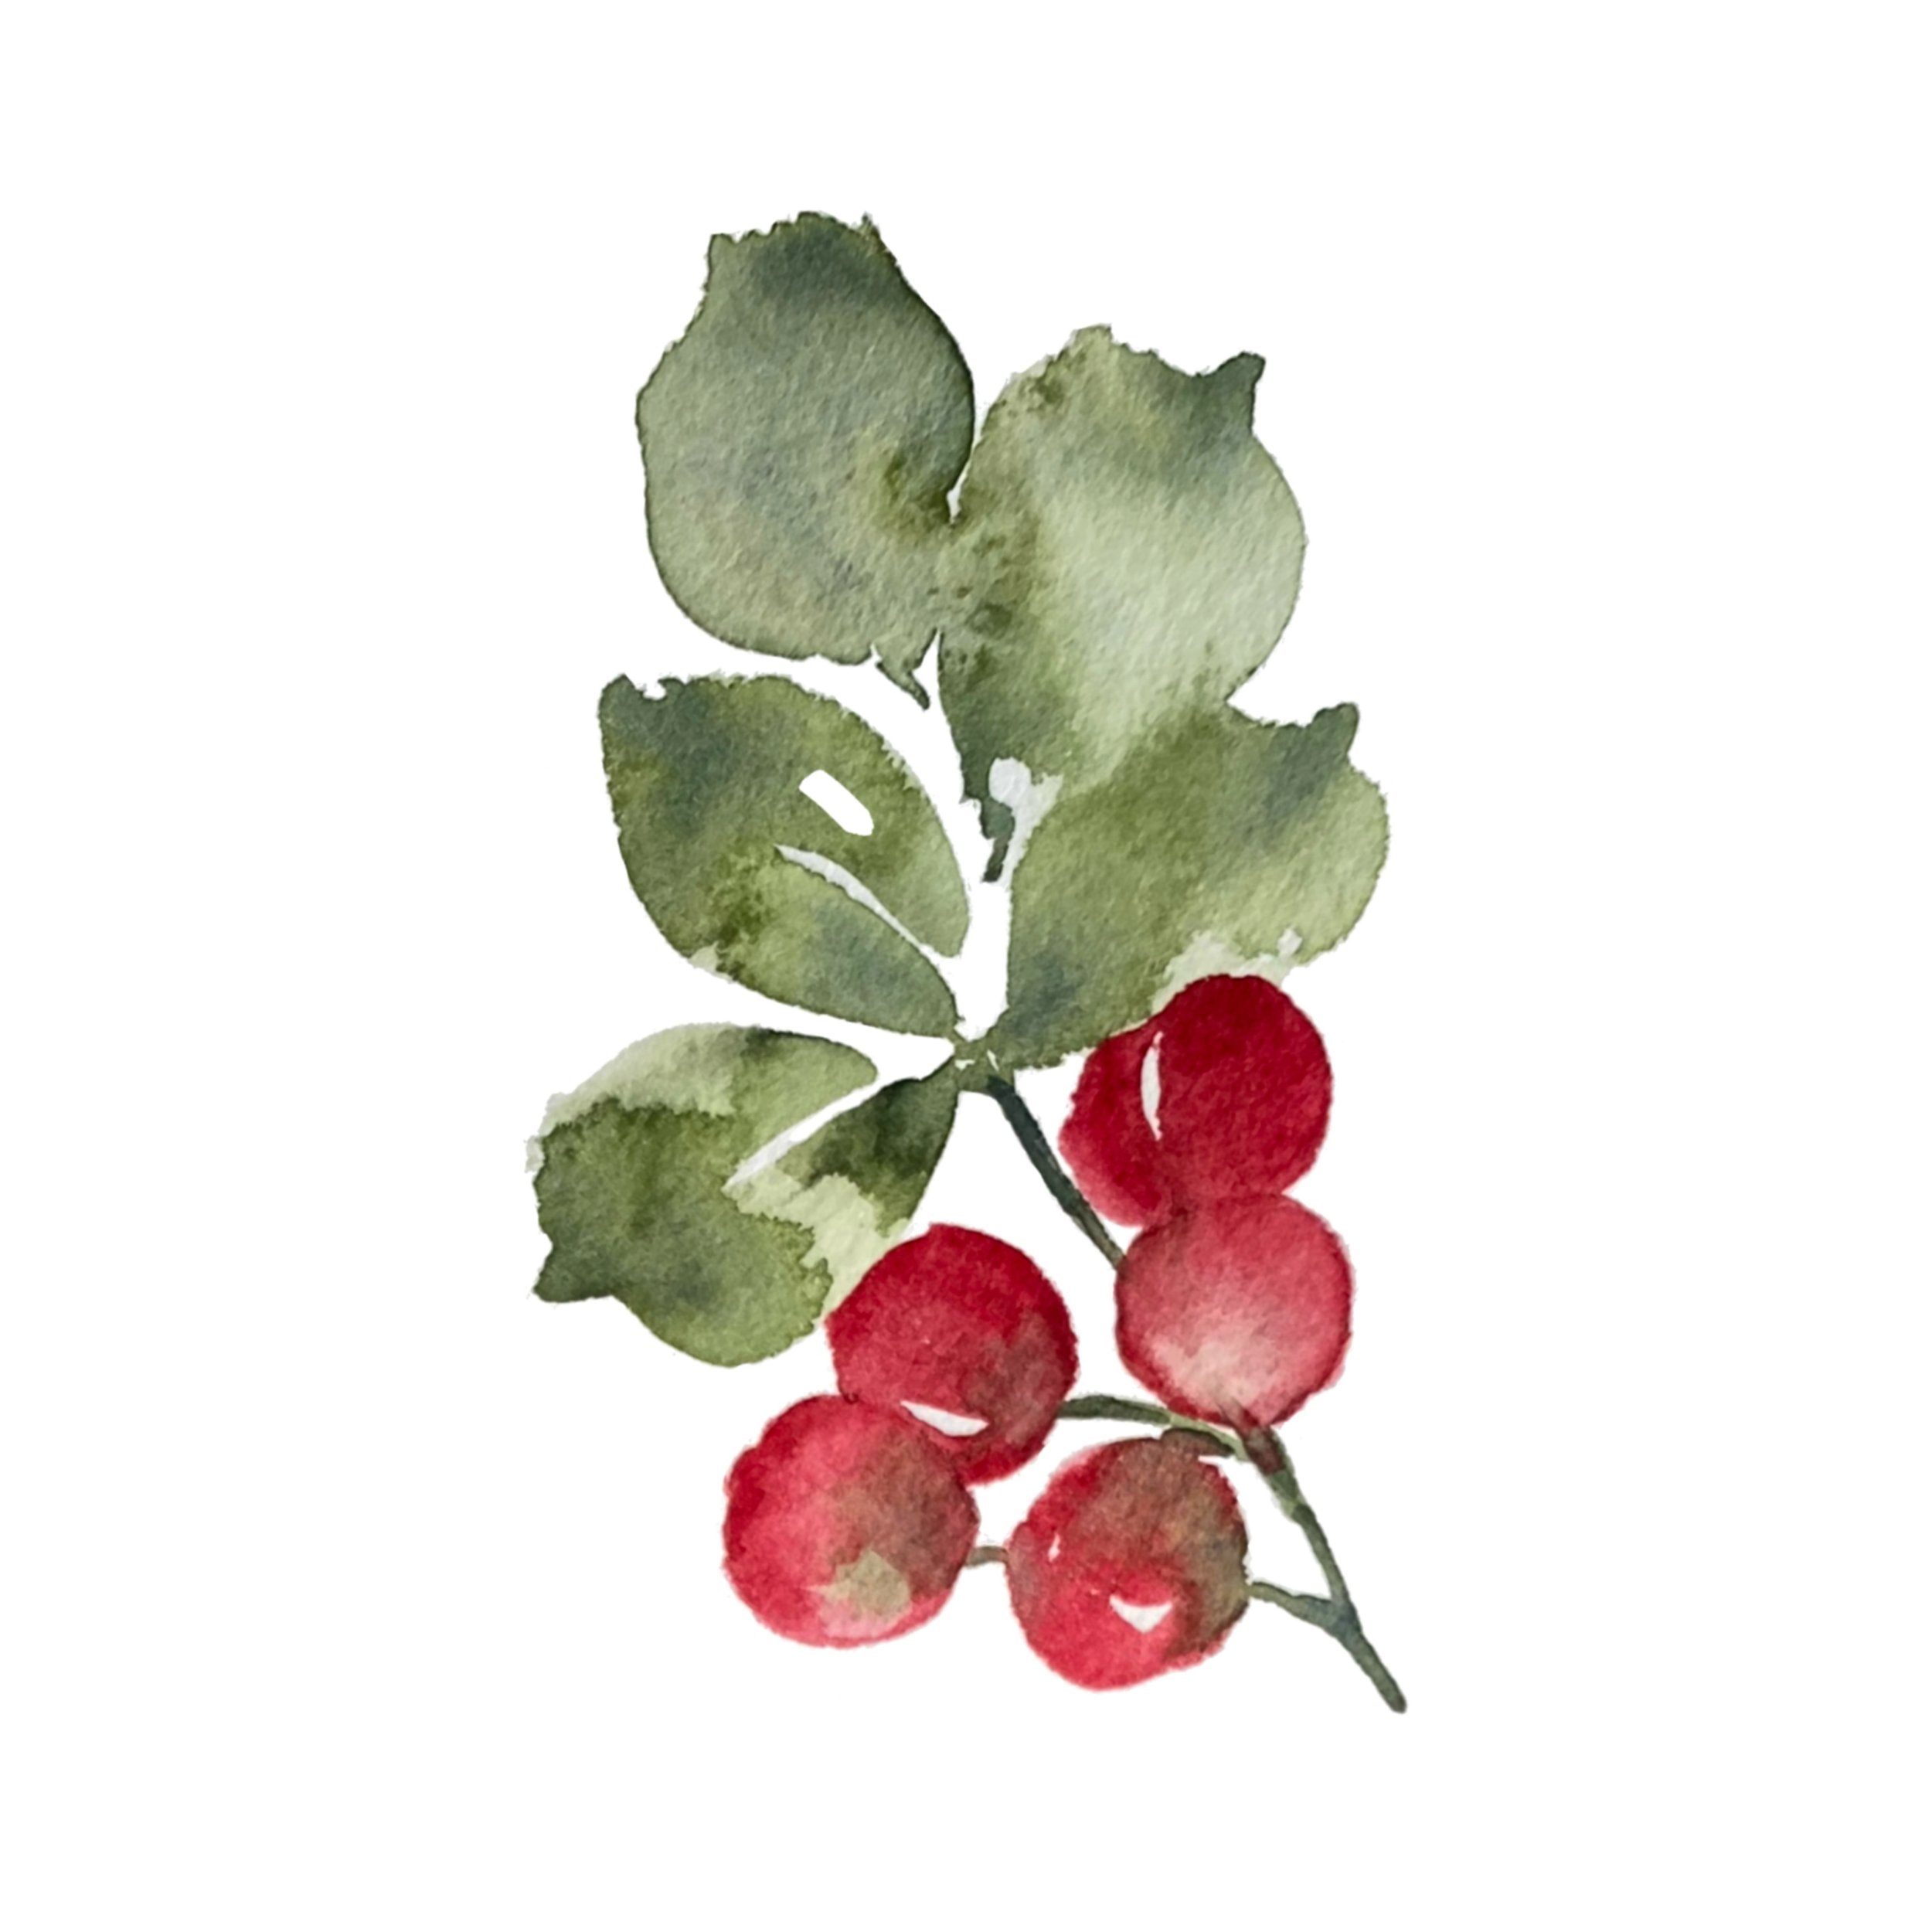 Keeping Sunday simple&hellip;&hearts;️&hearts;️&hearts;️

Watercolor berries for the win
&hellip;
&hellip;
#berries #watercolor #watercolorart #artist #berrybranch #watercolorberries #fruit #watercolorfruit #happywatercolor #sweetseasonsart #art #art